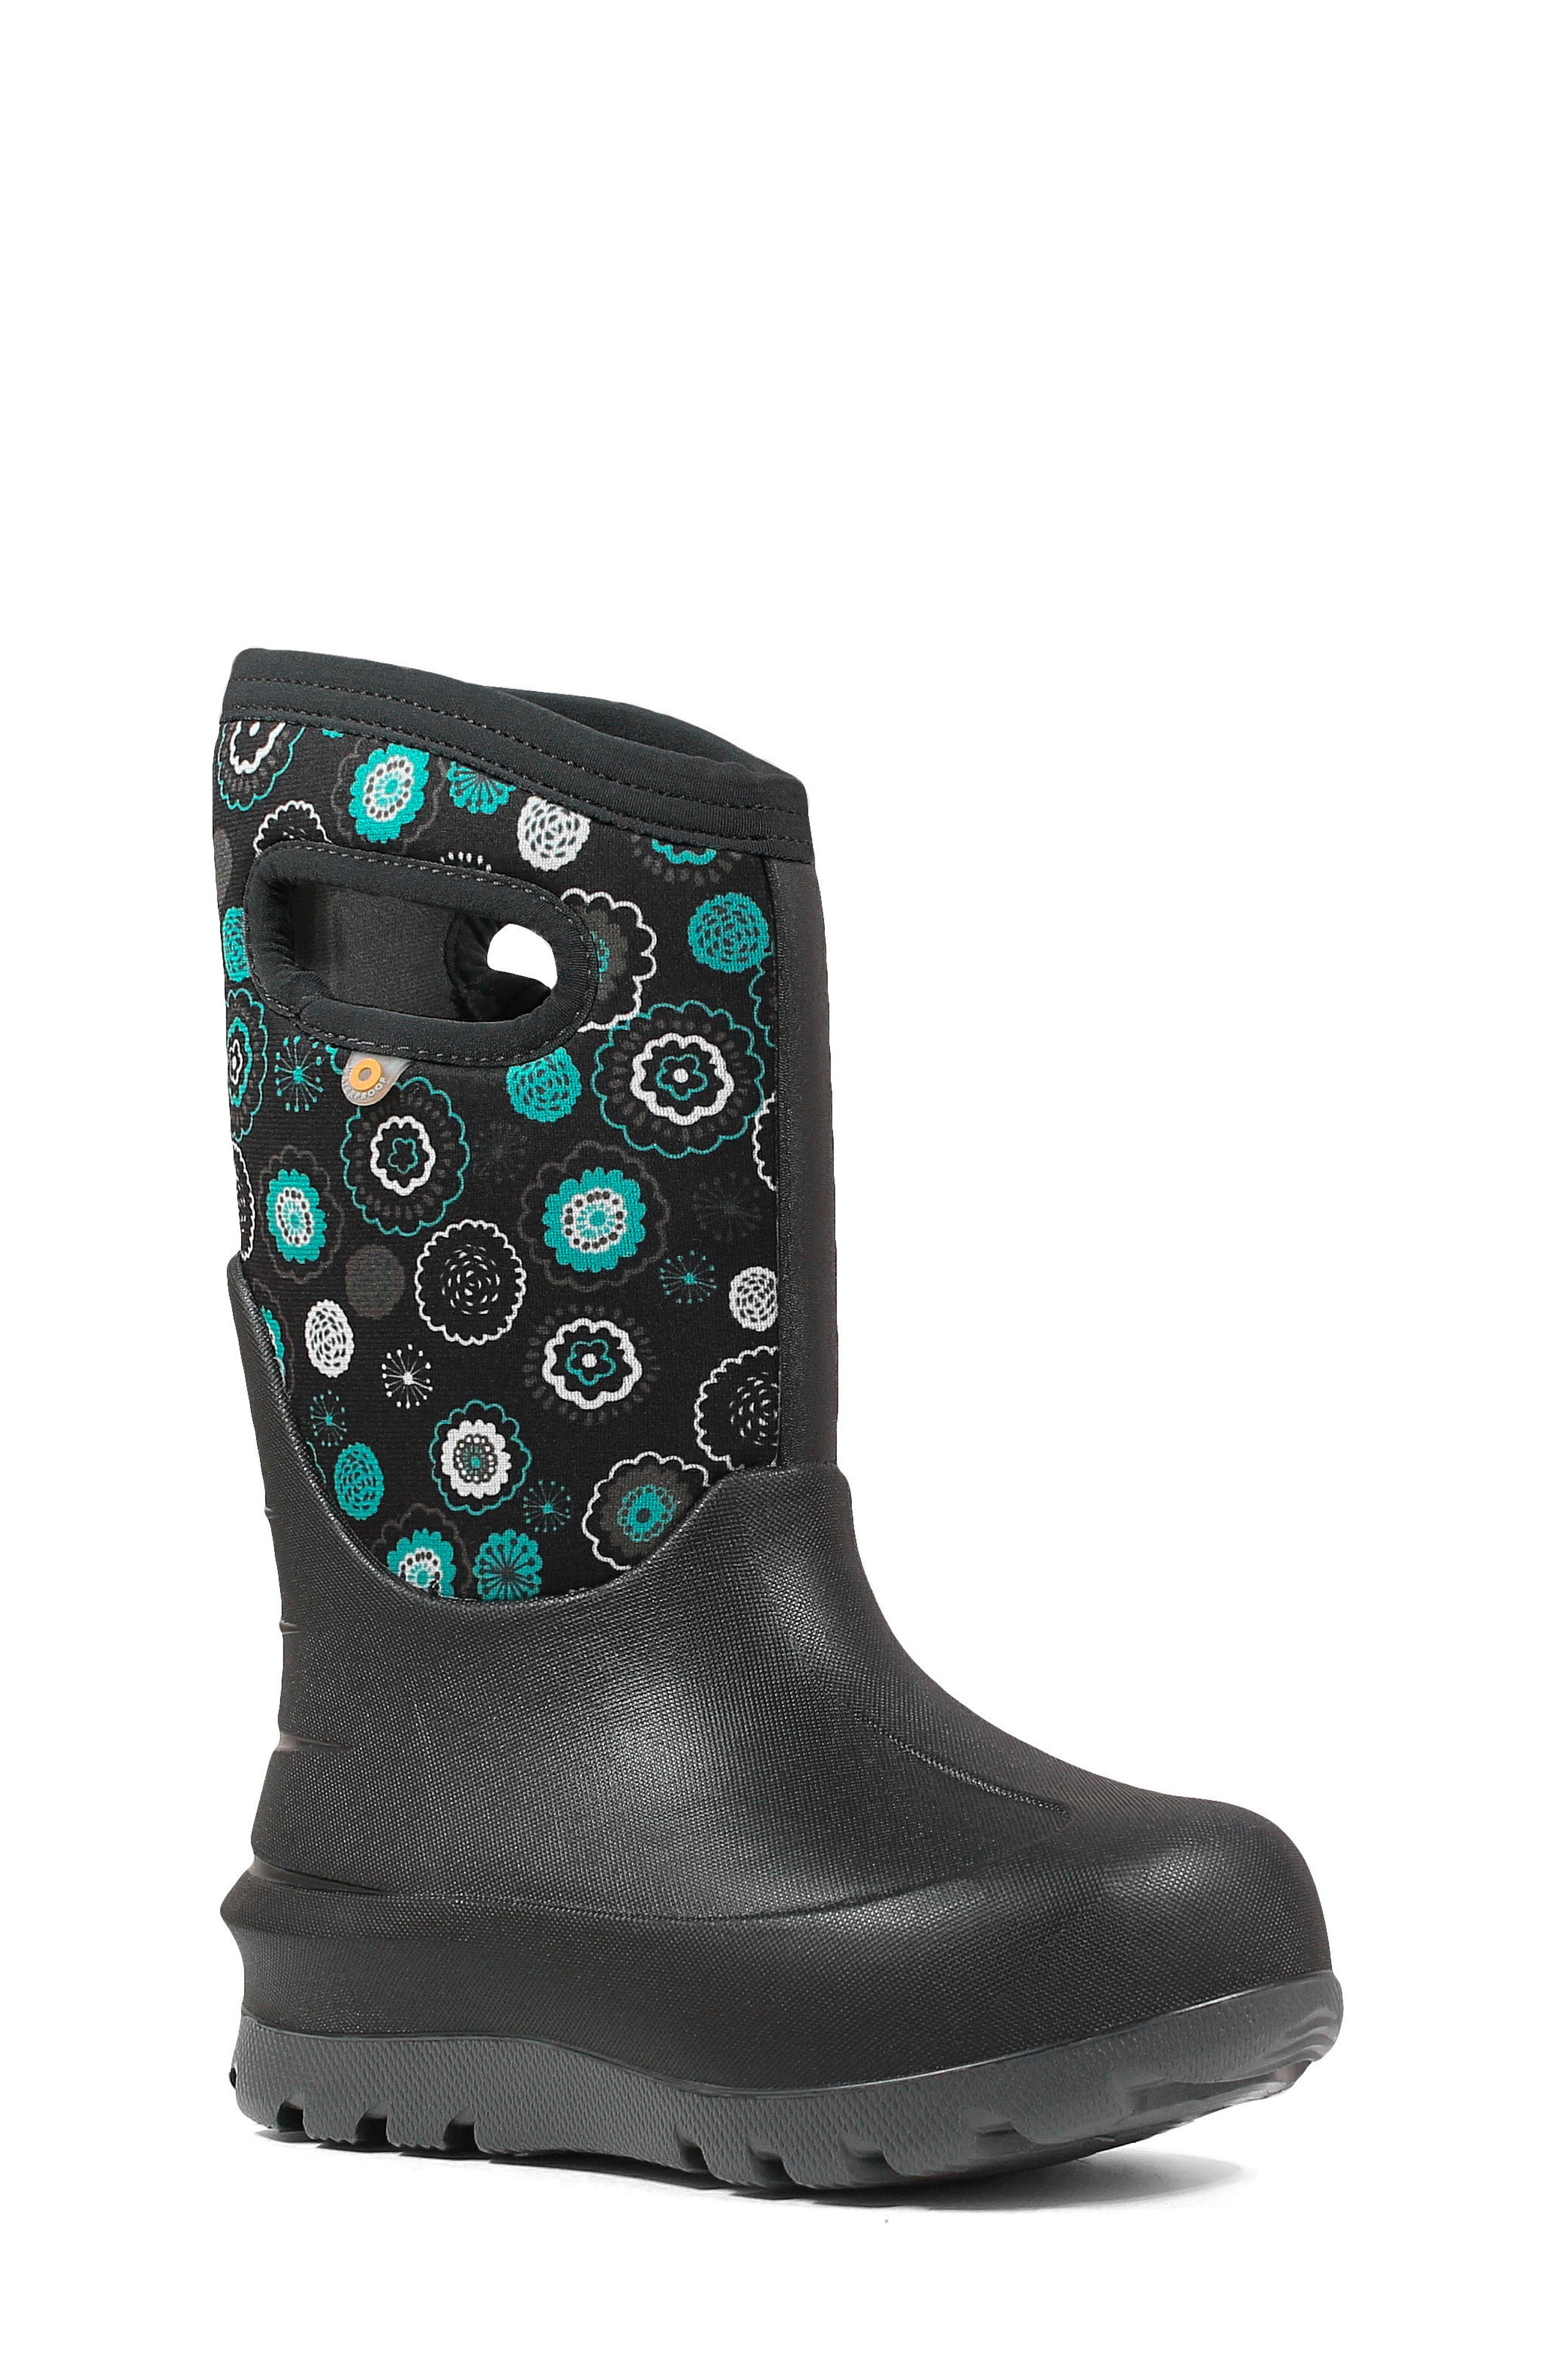 bogs snow boots clearance